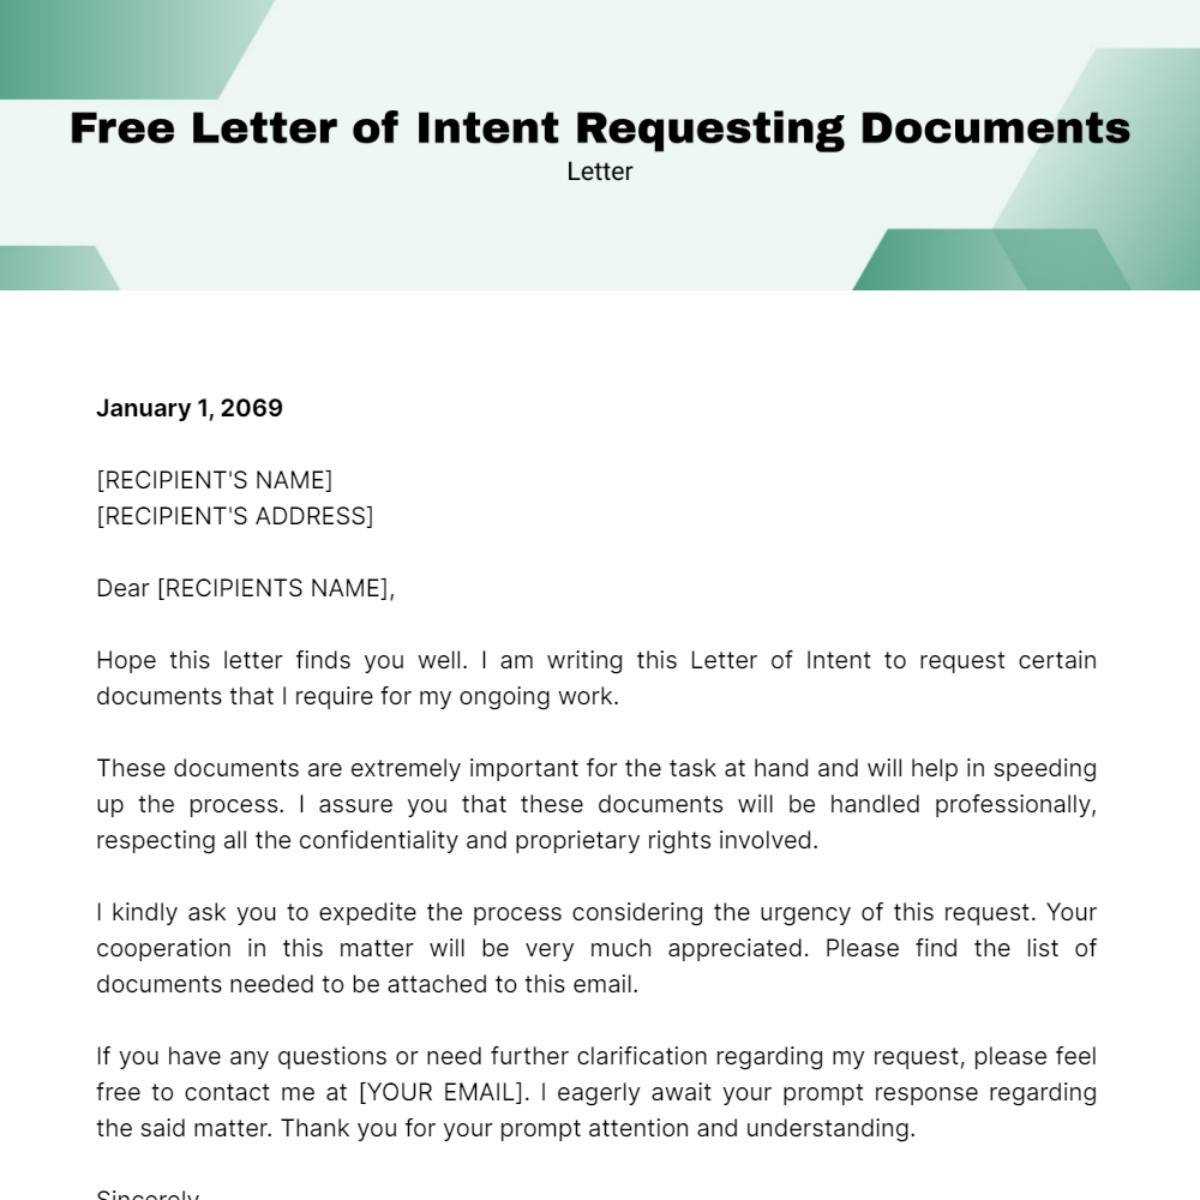 Letter of Intent Requesting Documents Template